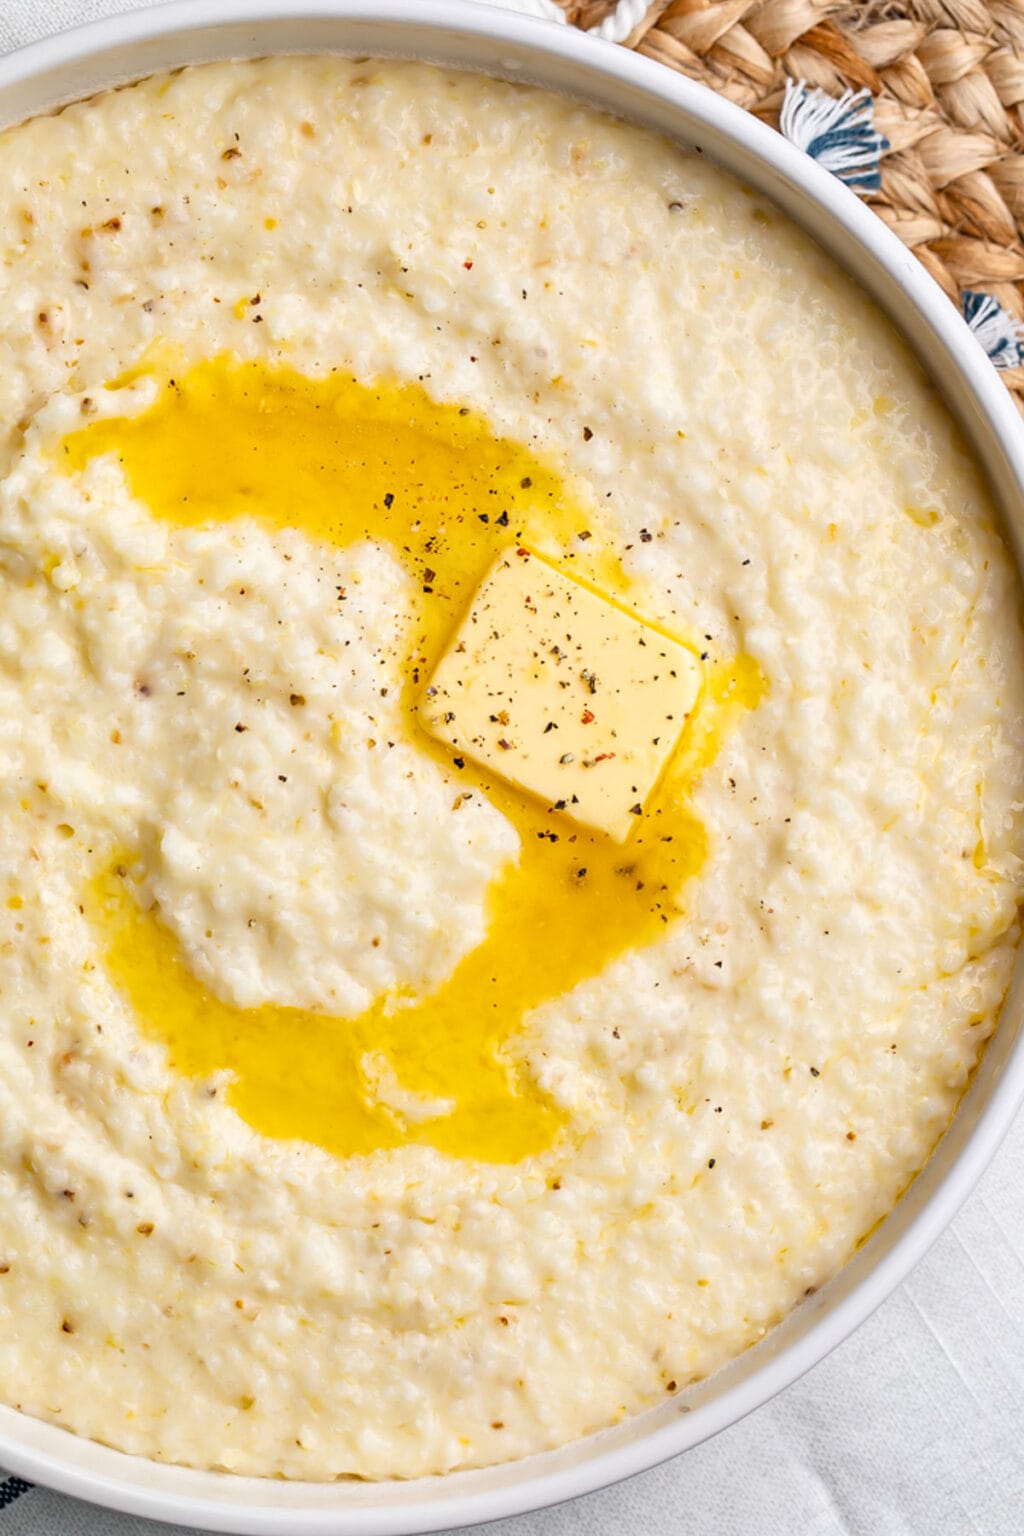 Rich & Creamy Grits Recipe (and What Are Grits Anyway?) - 40 Aprons